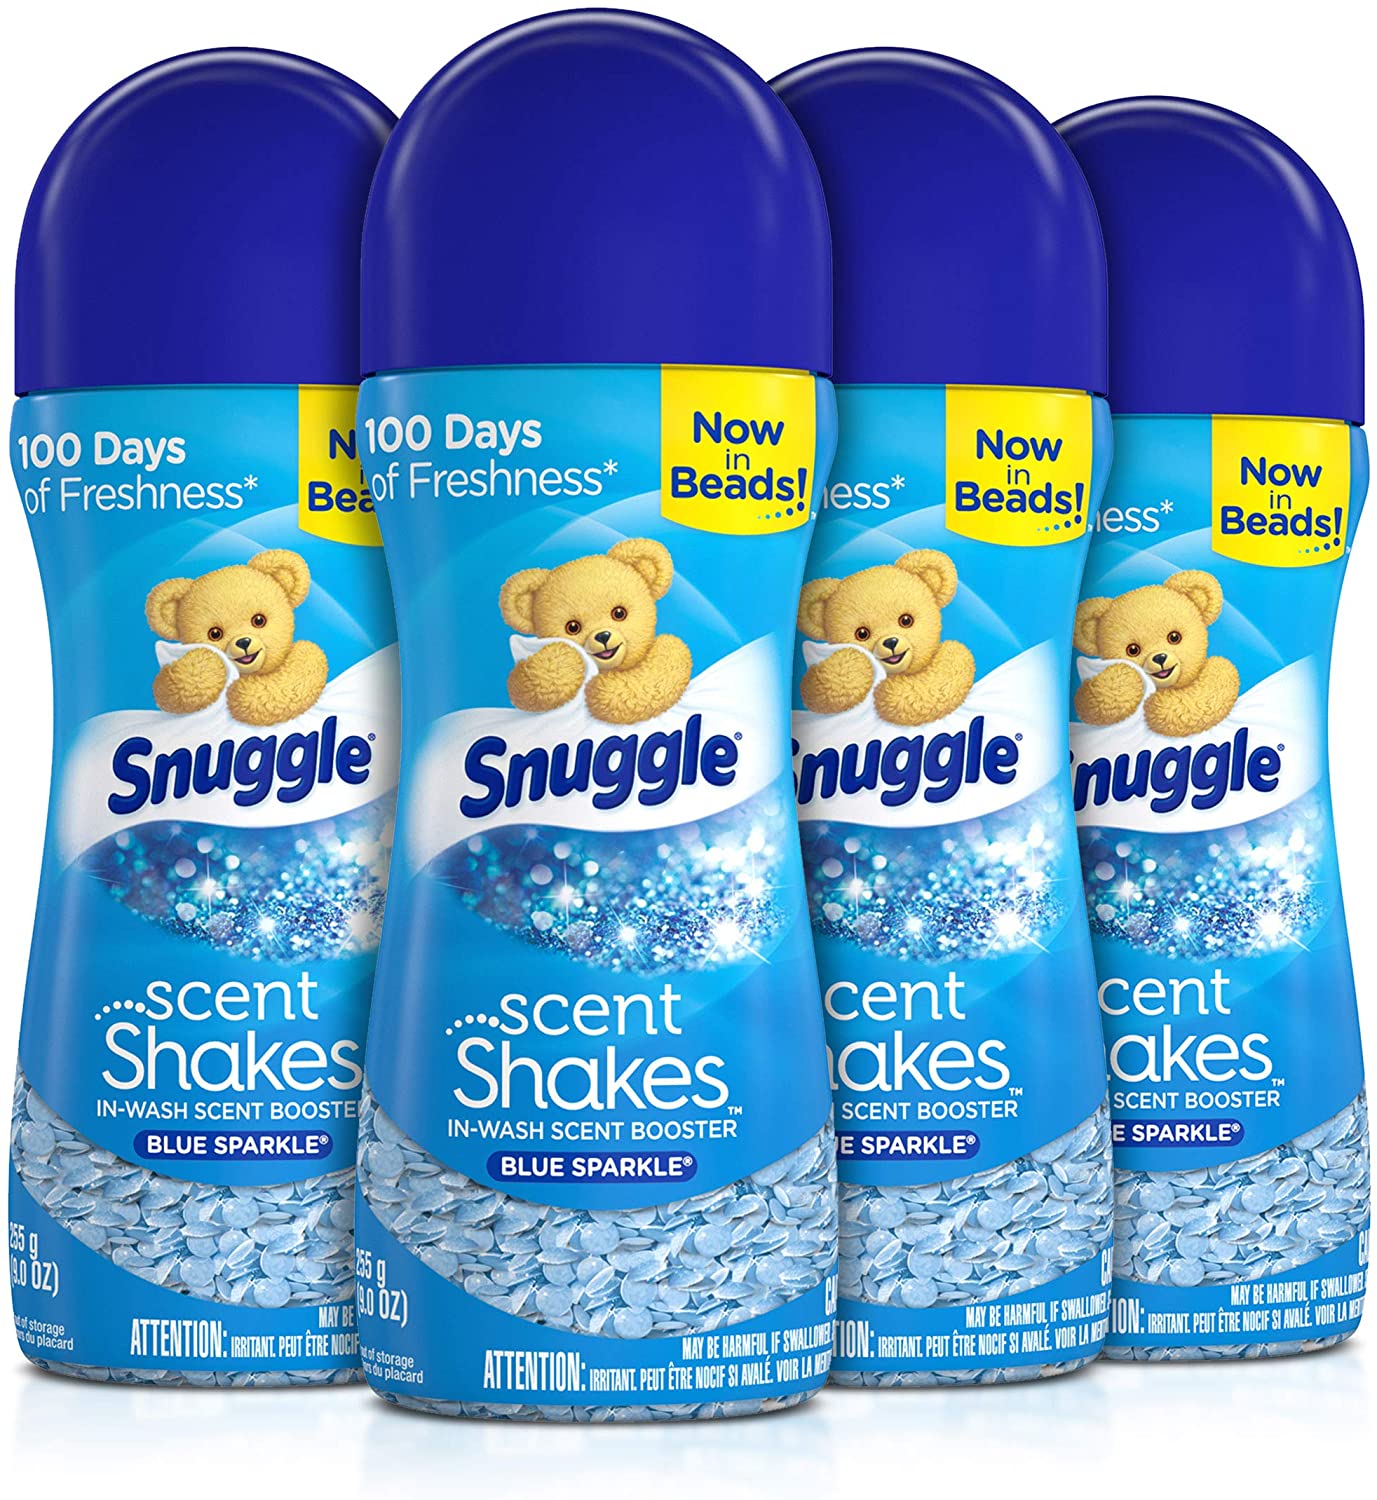 Amazon, 4 pack Snuggle Scent Shakes in-Wash Scent Booster Beads, Blue Sparkle or Superfresh Original, $10.94 w/ S&S